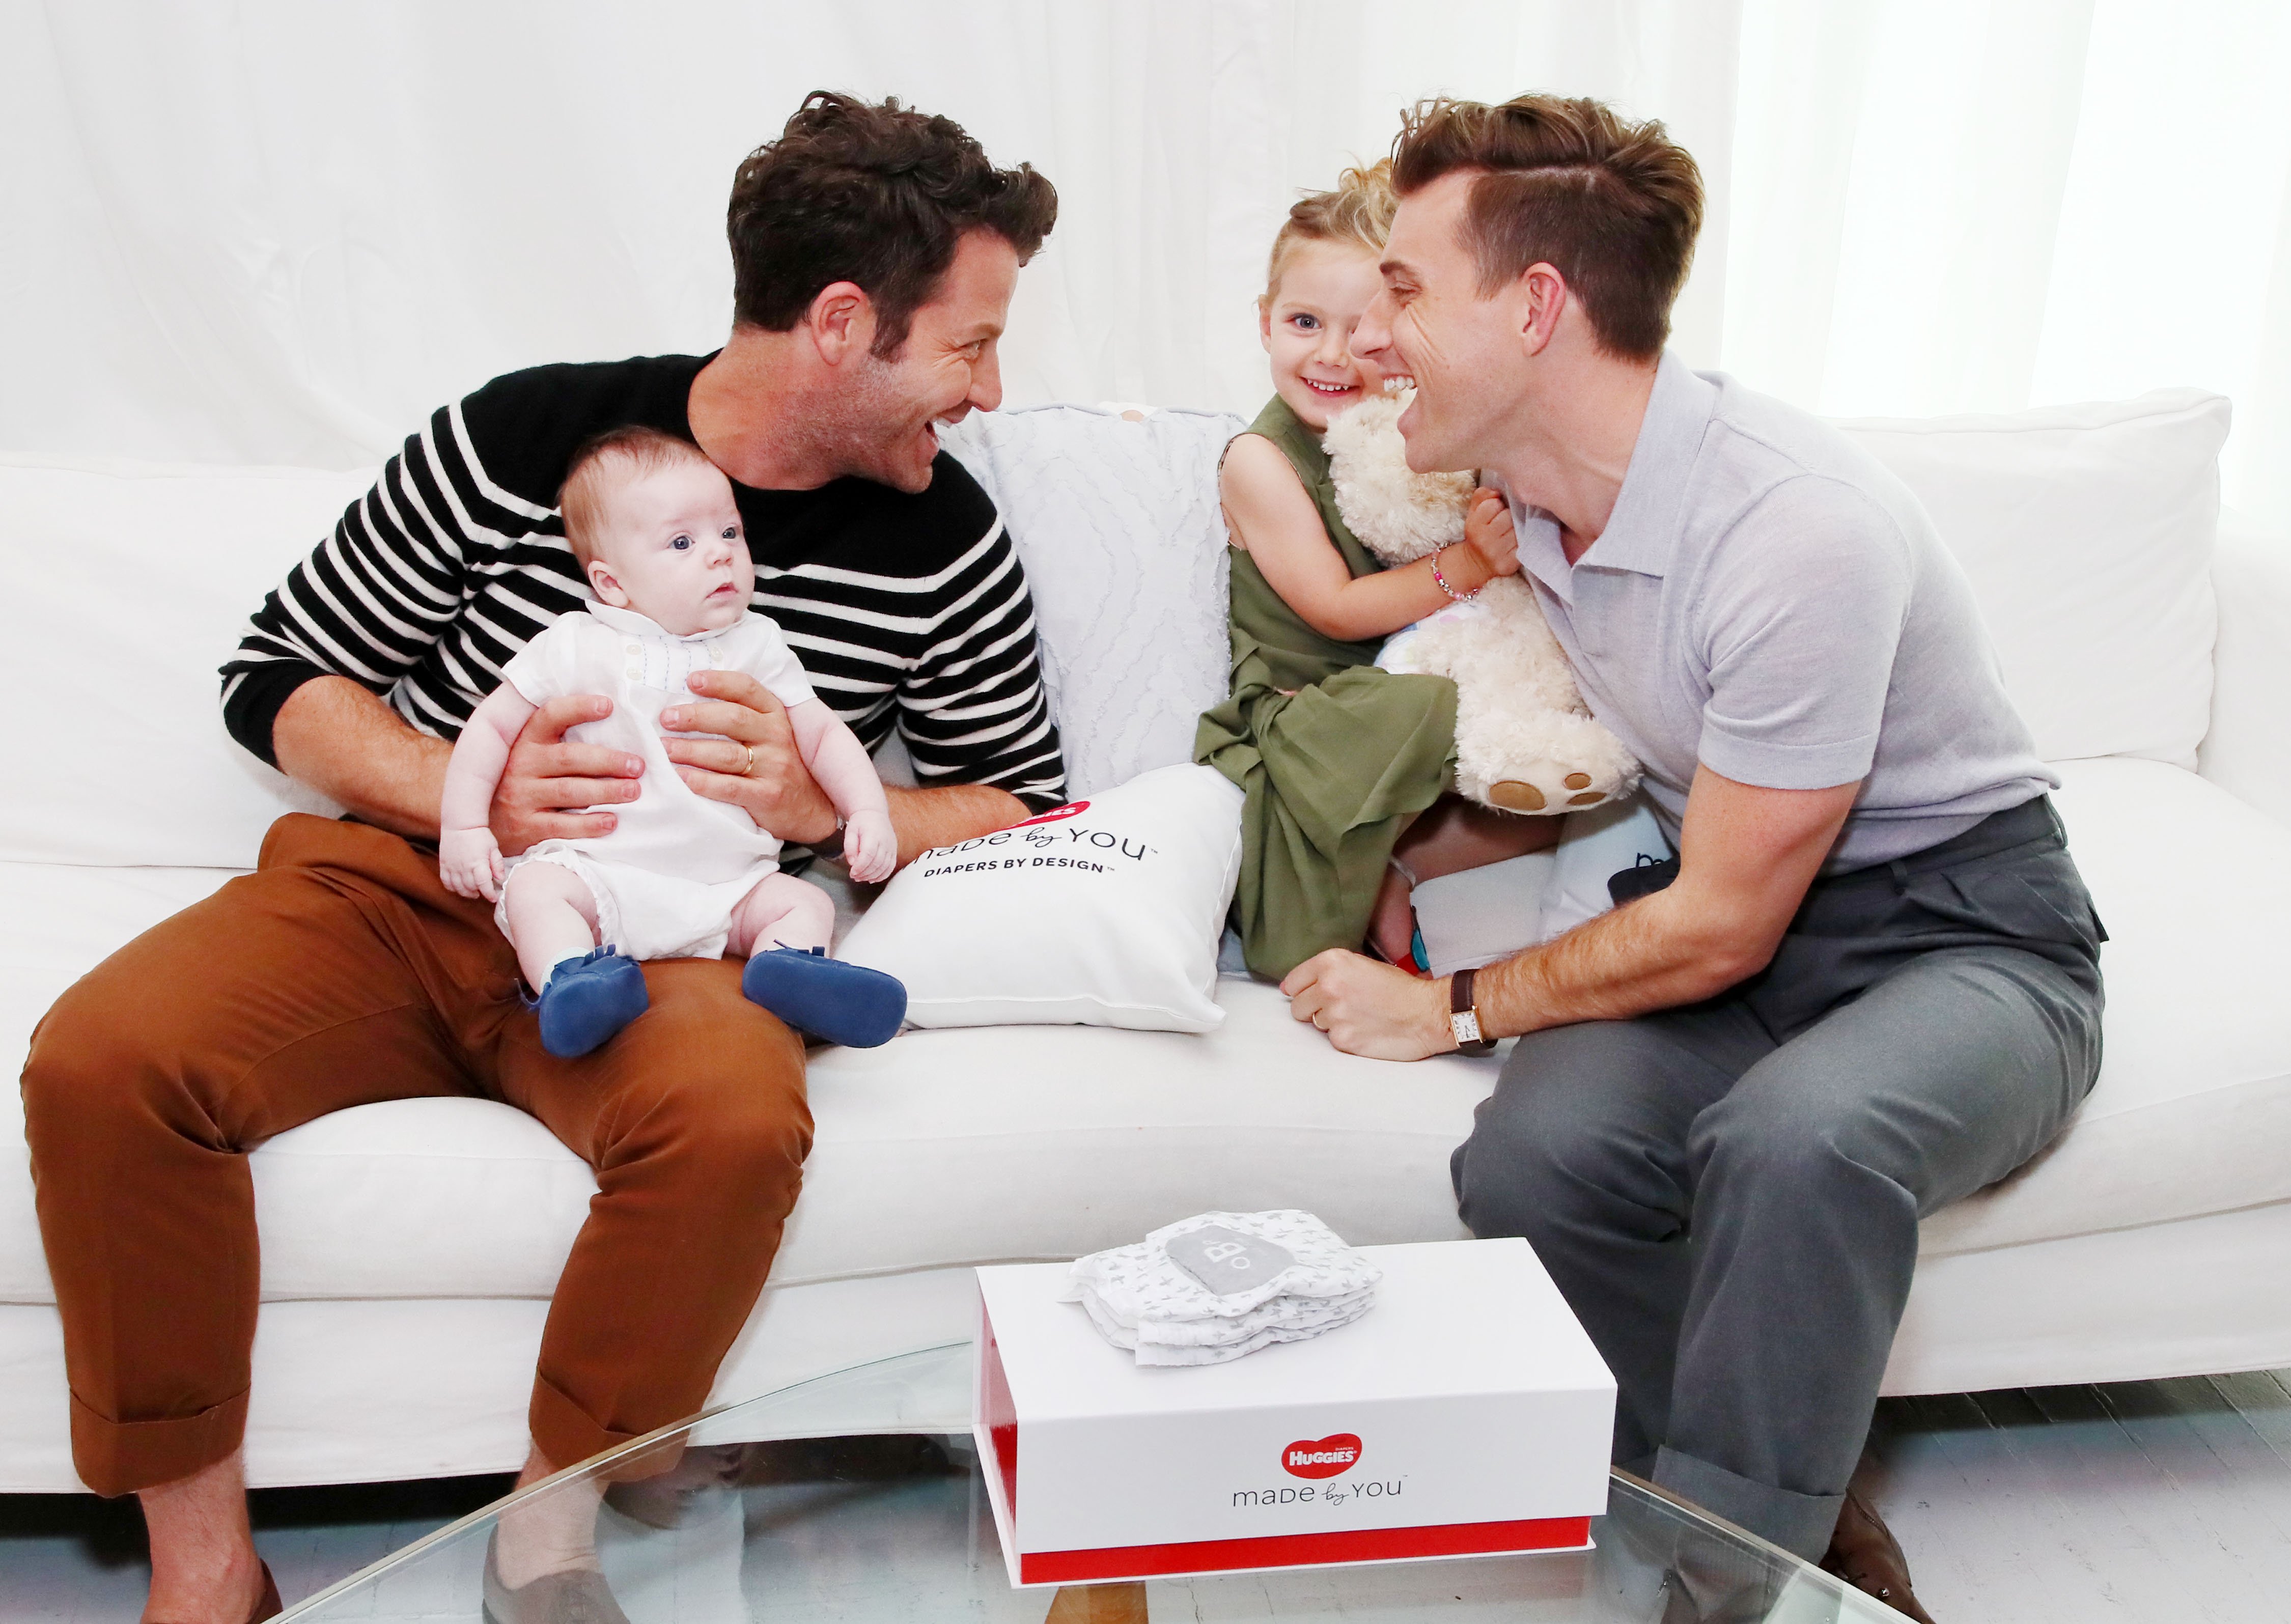 Nate Berkus and Jeremiah Brent and their children, Poppy and Oskar. | Source: Getty Images